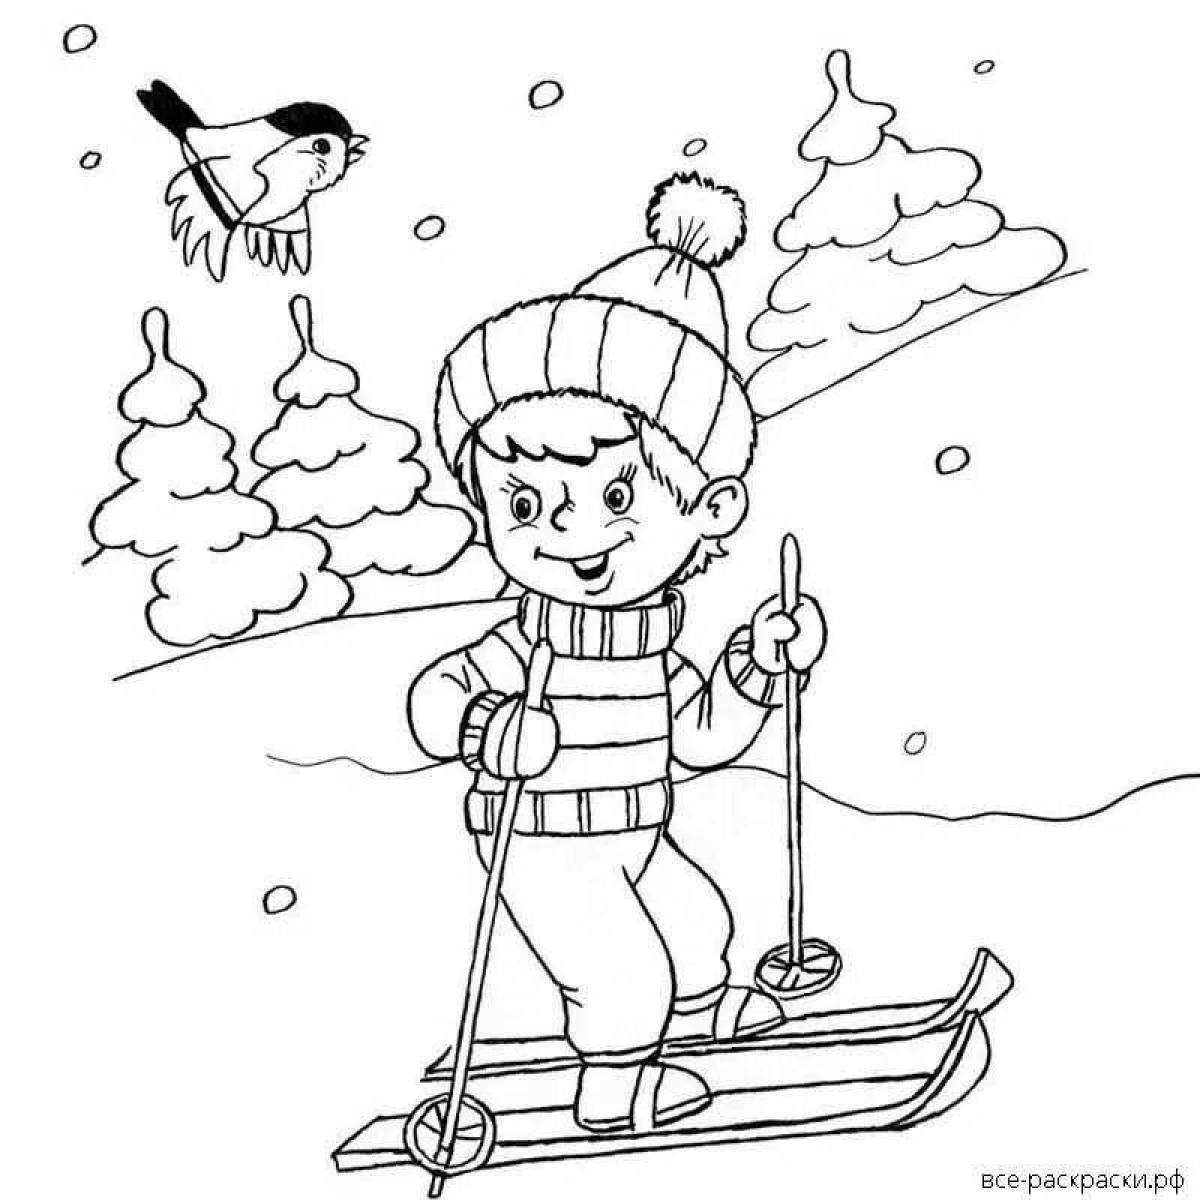 Coloring book persistent boy on skis